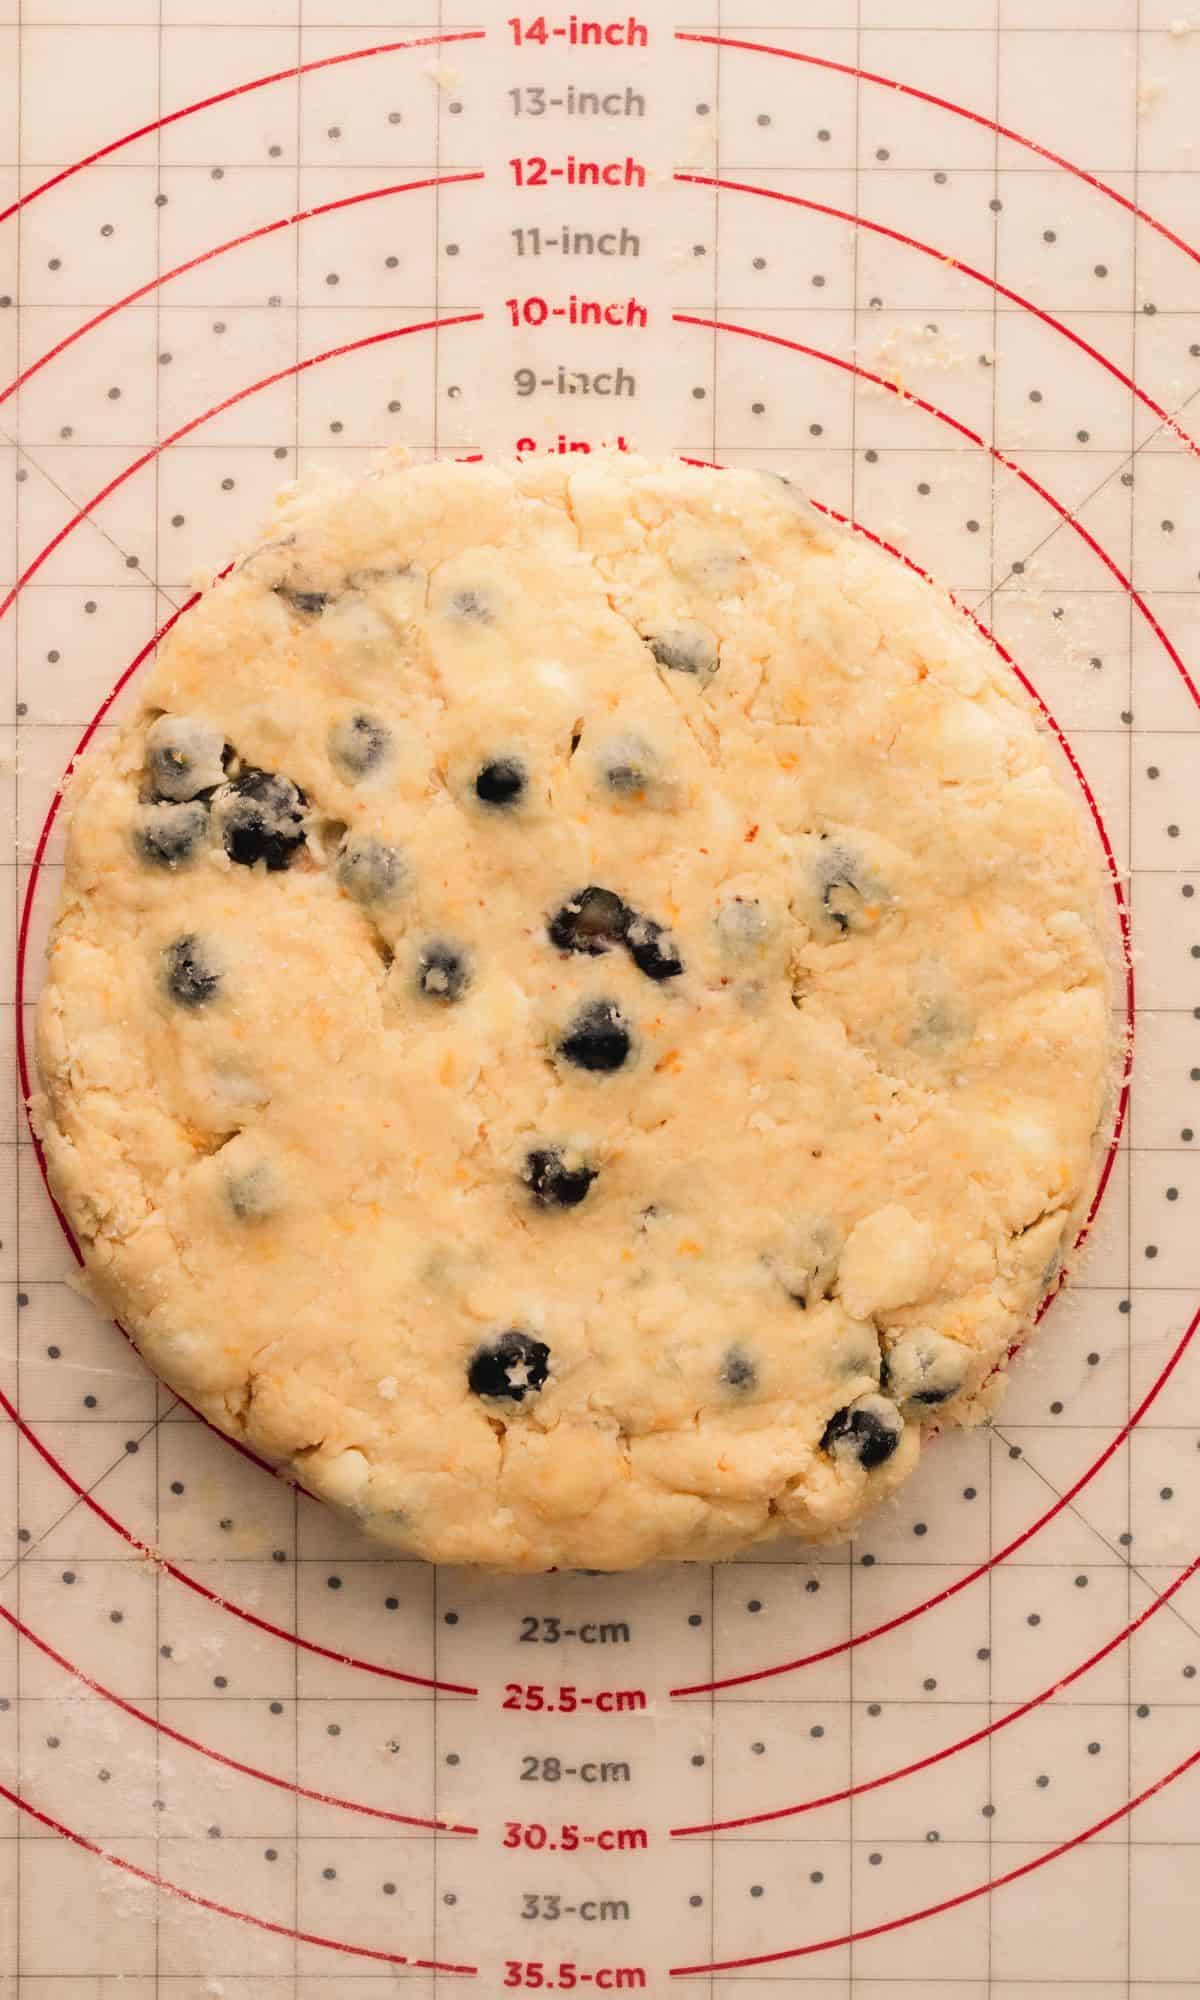 Blueberry scone dough before cutting into wedges.